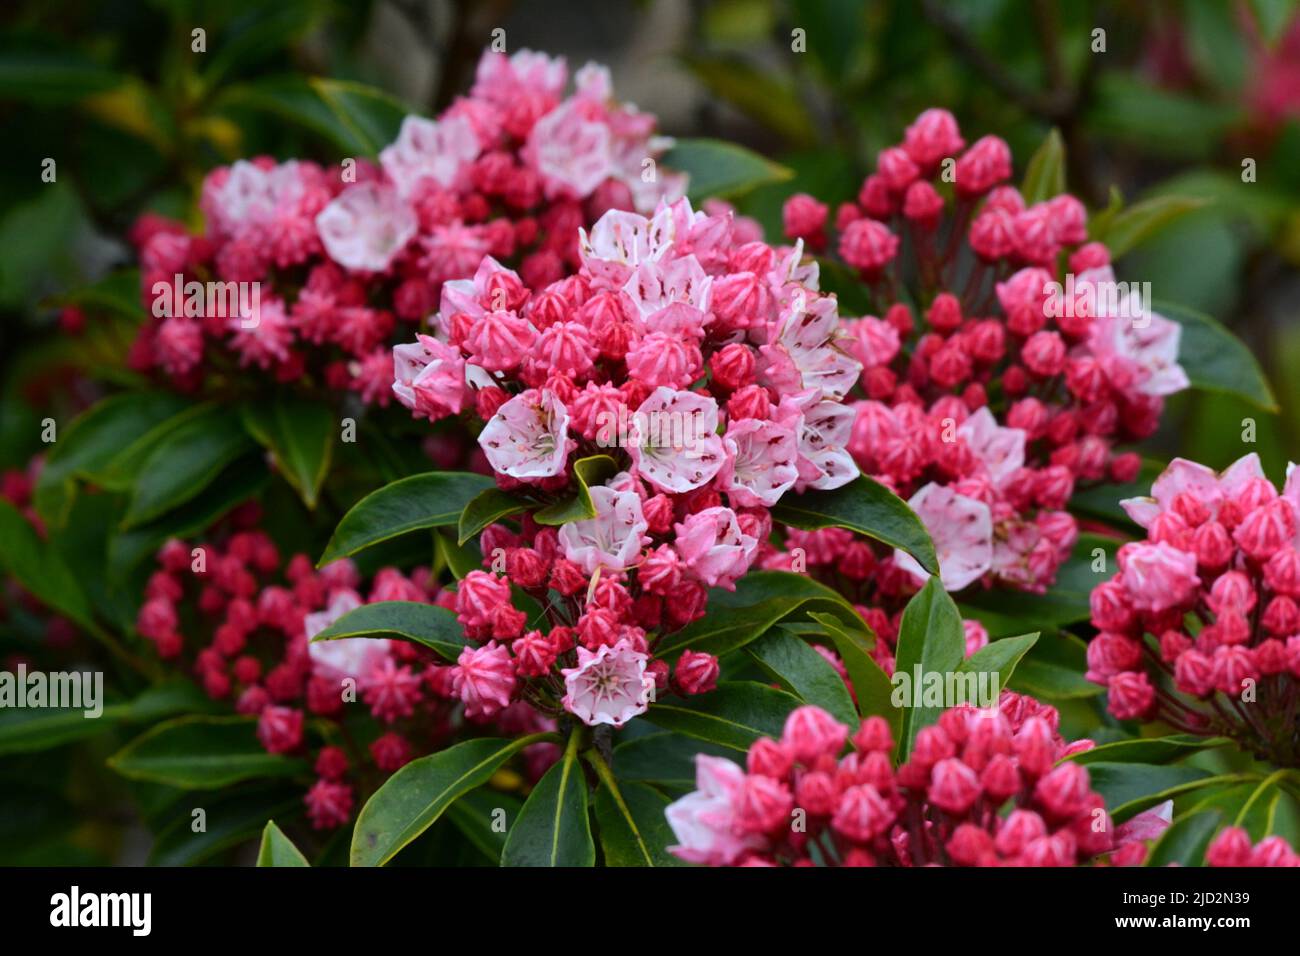 Kalmia latifolia Olympic Fire Mountain laurel Olympic Fire large clusters of pink cup shaped crimped flowers opening from red buds Stock Photo